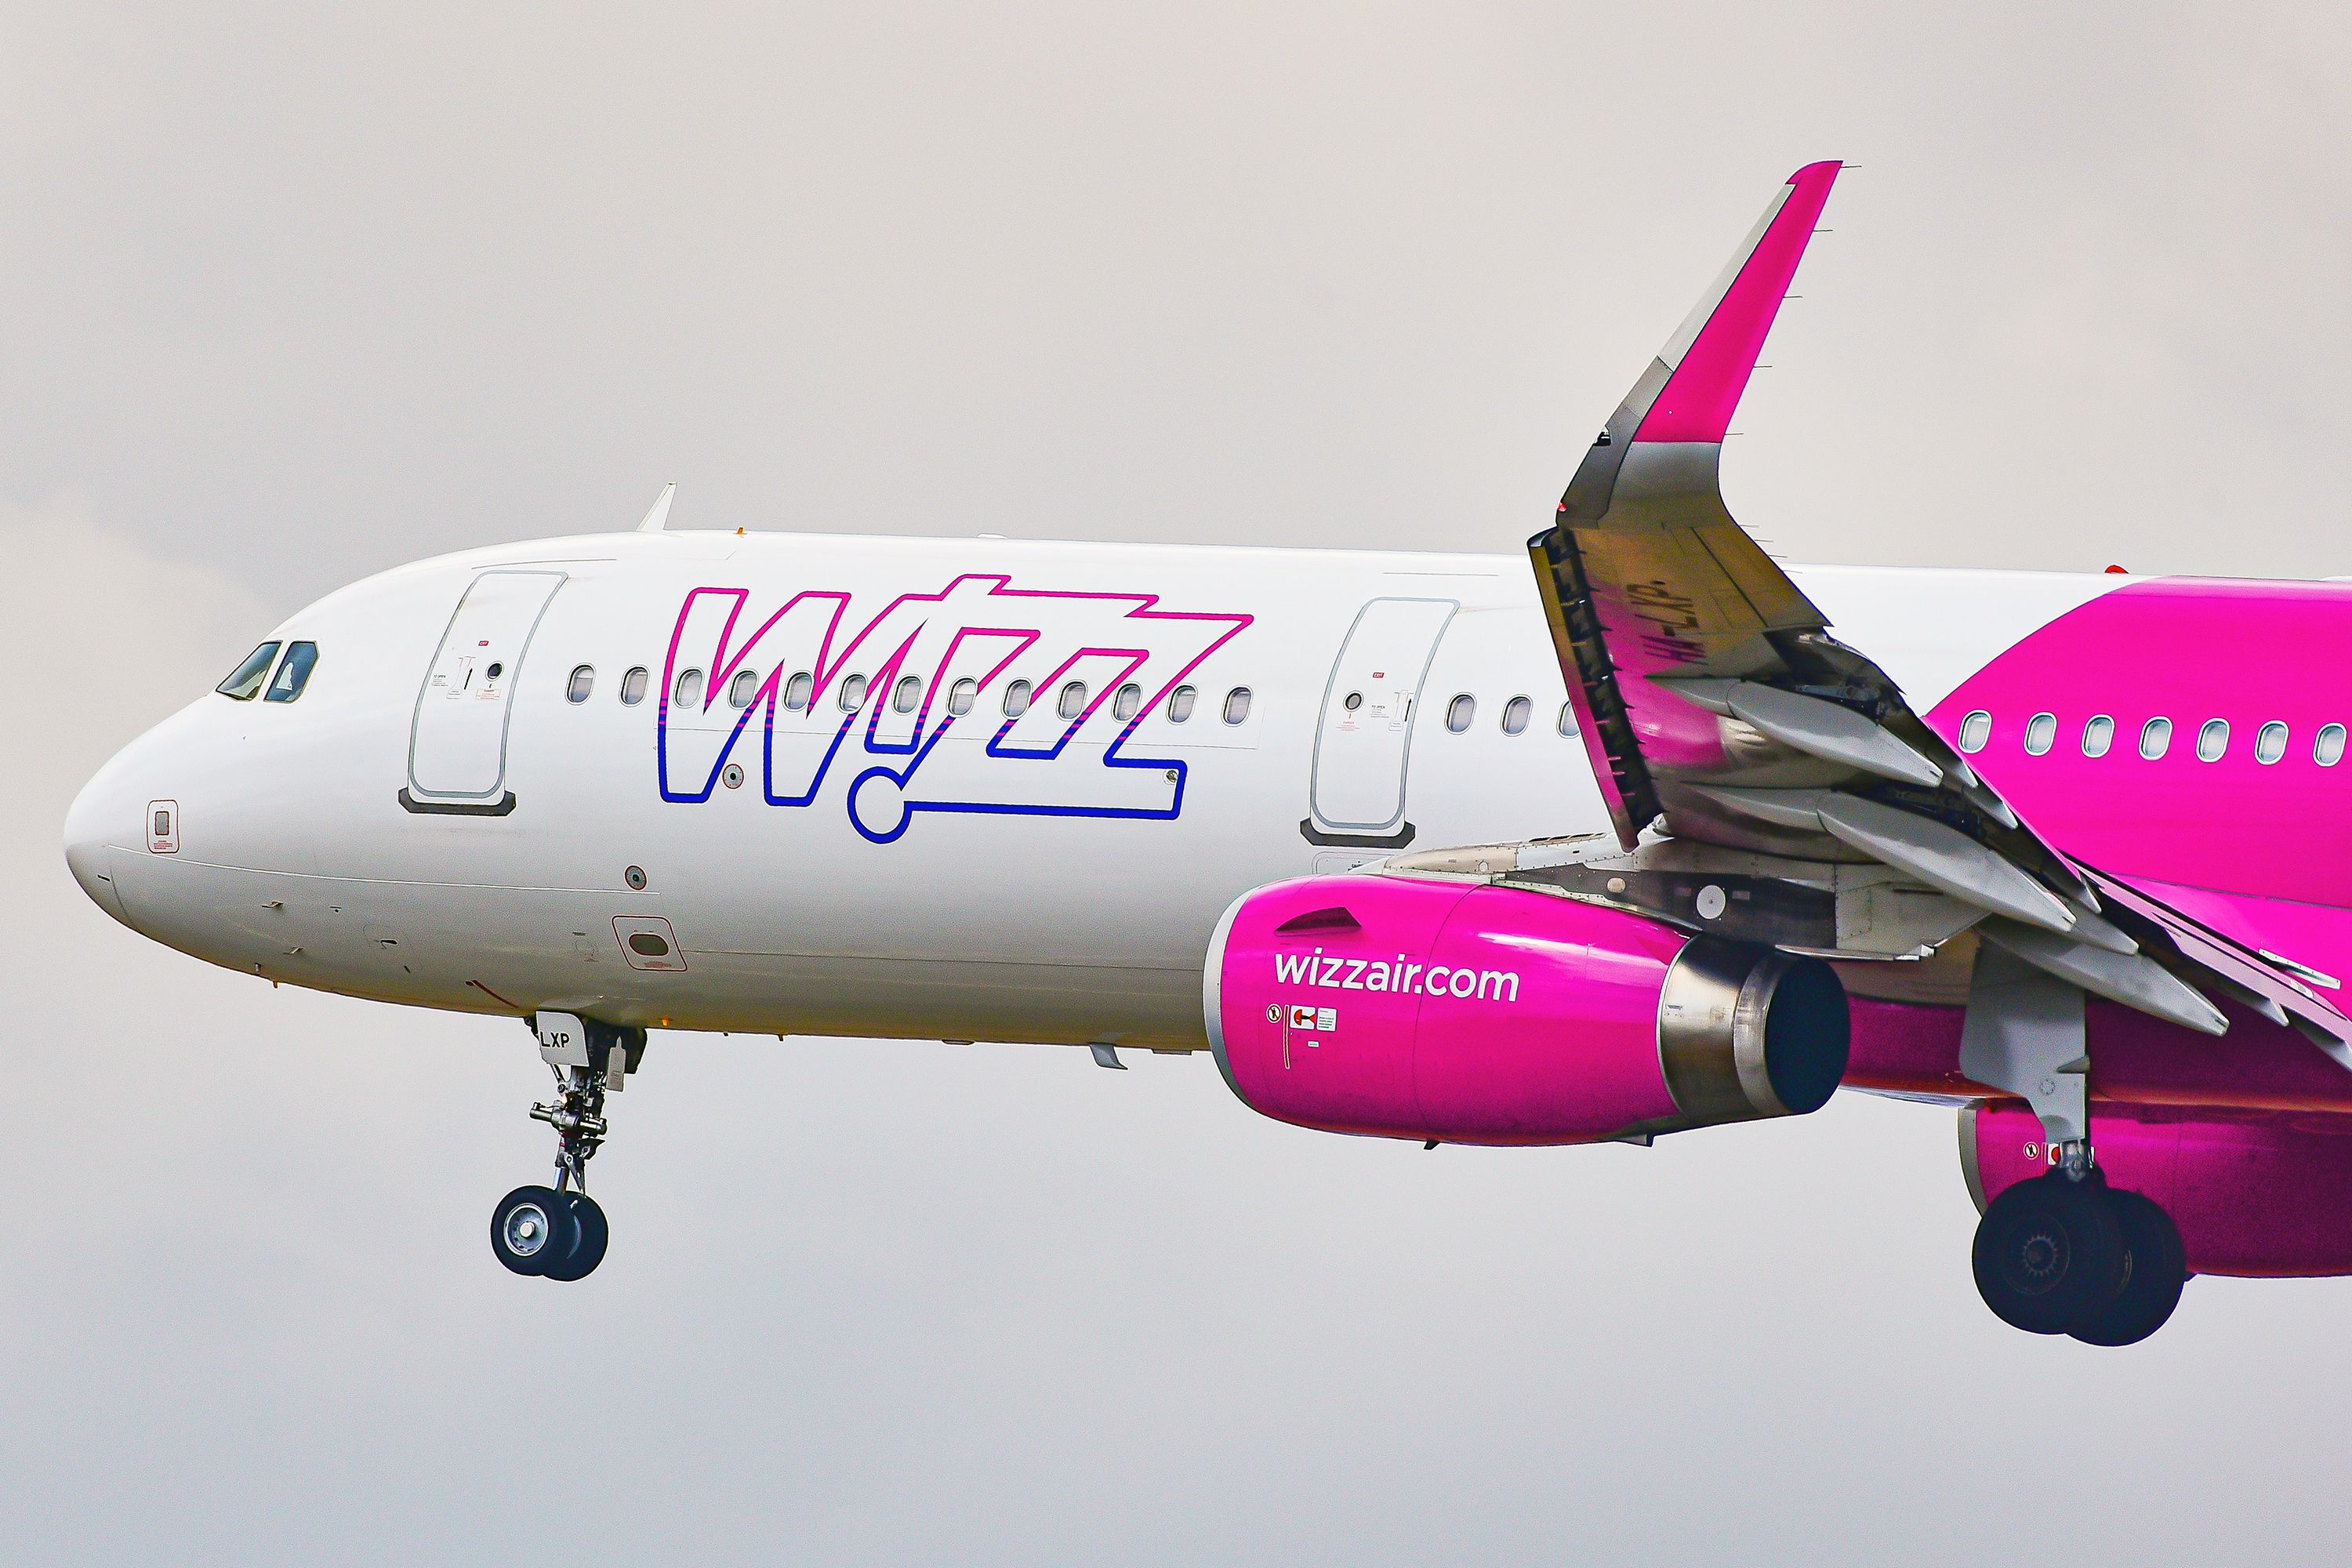 A Wizz Air Airbus A321 taking off